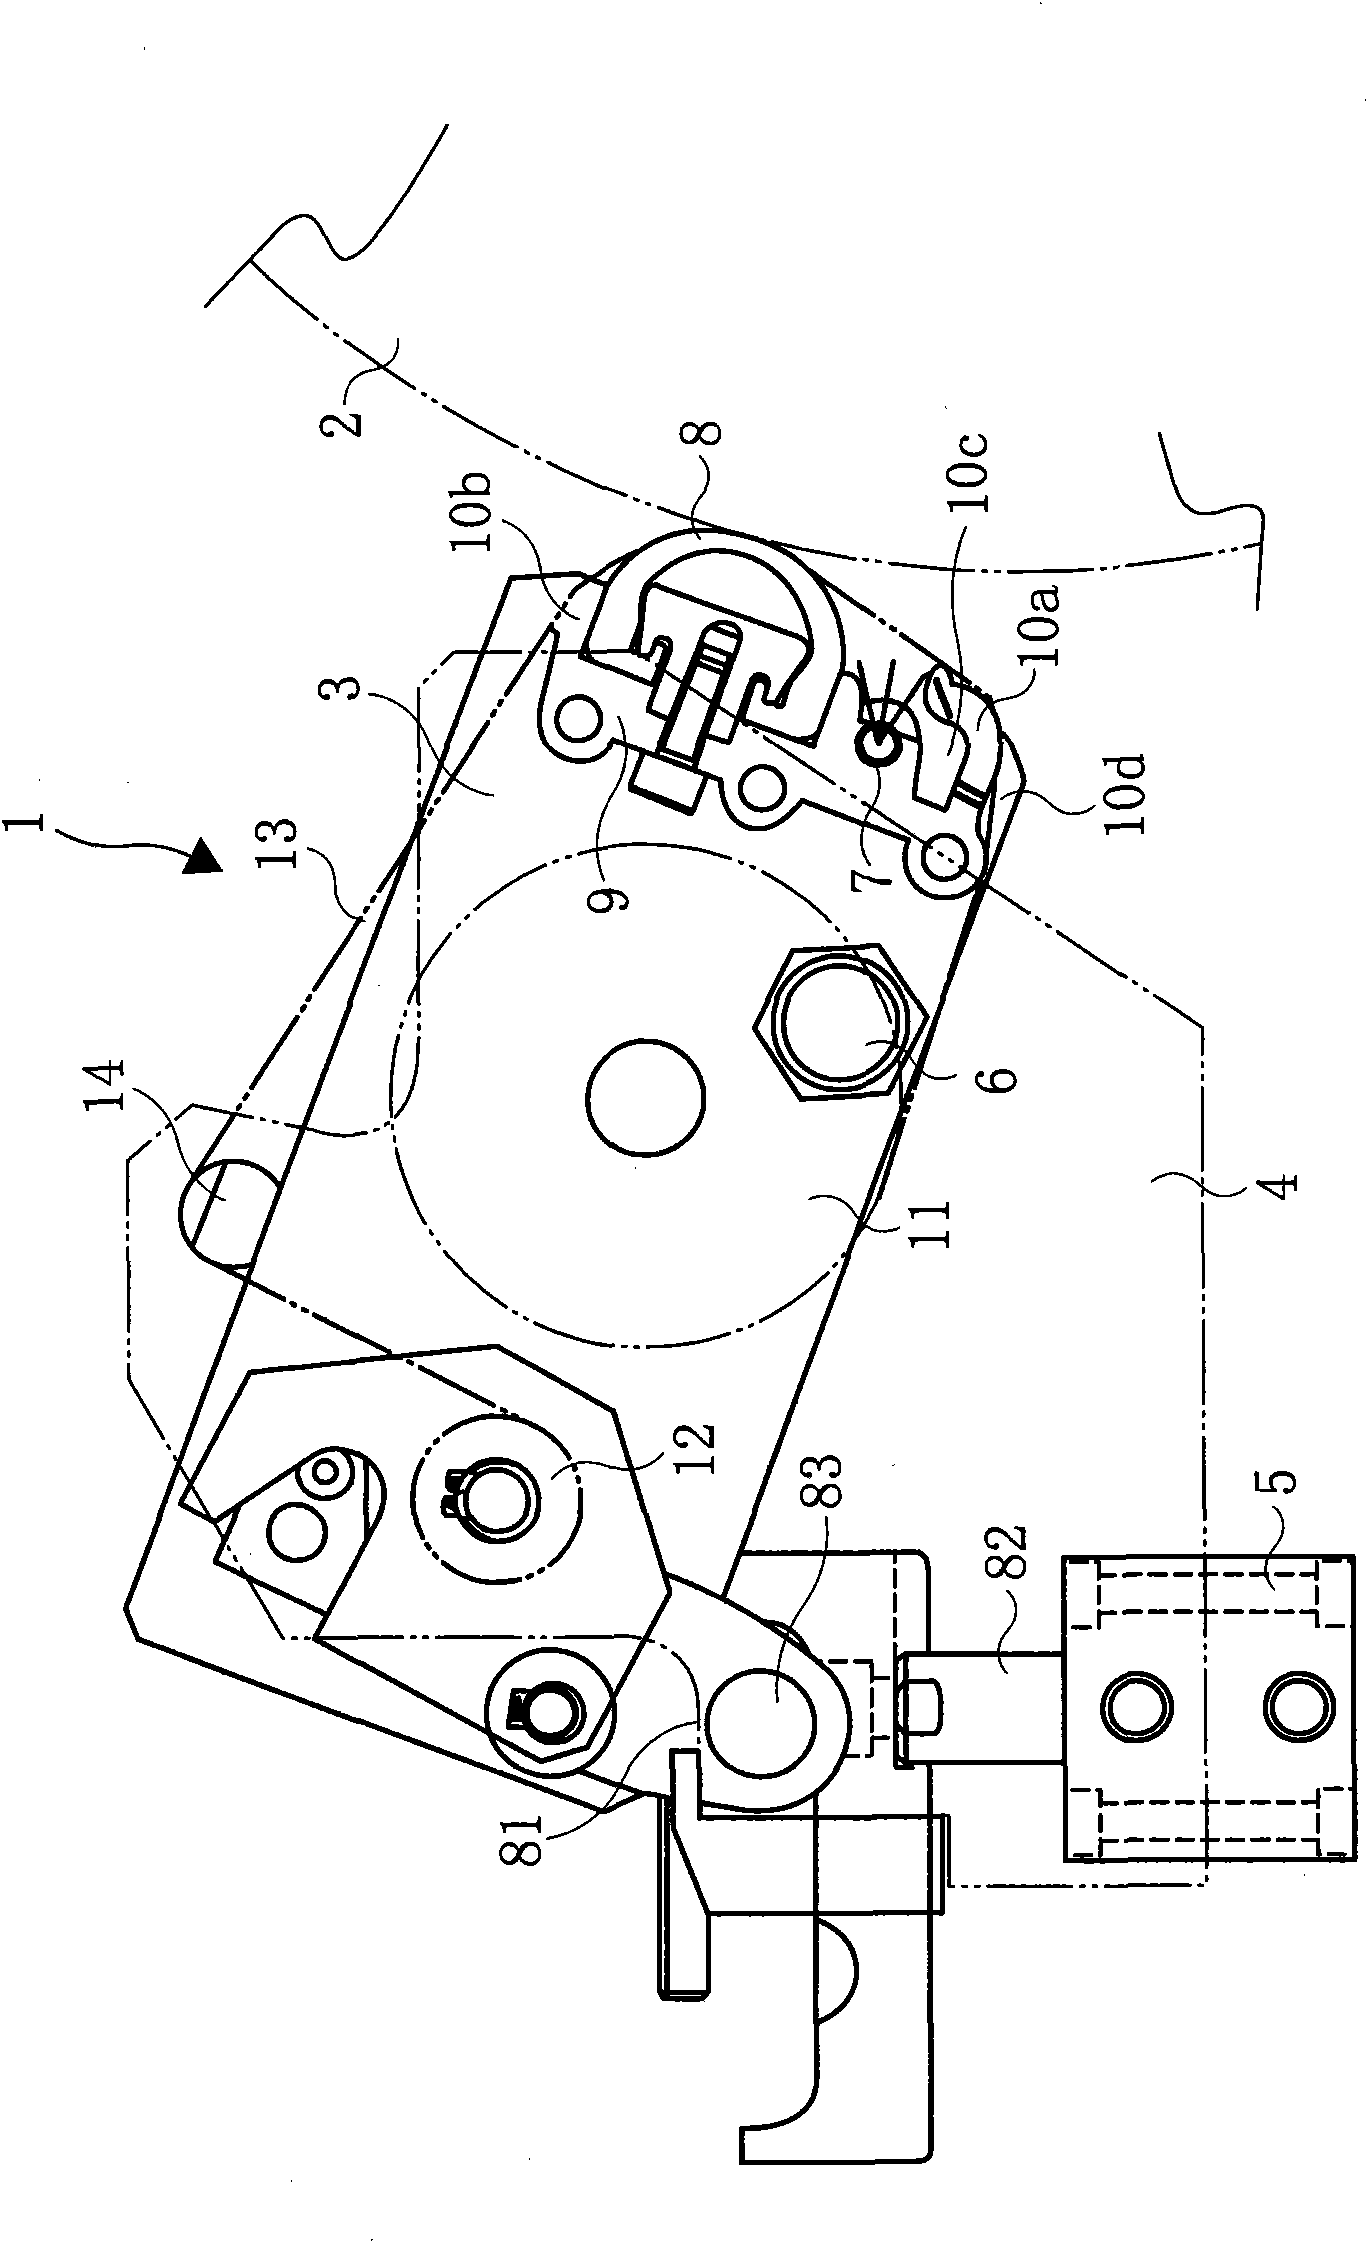 Cylinder rinsing device